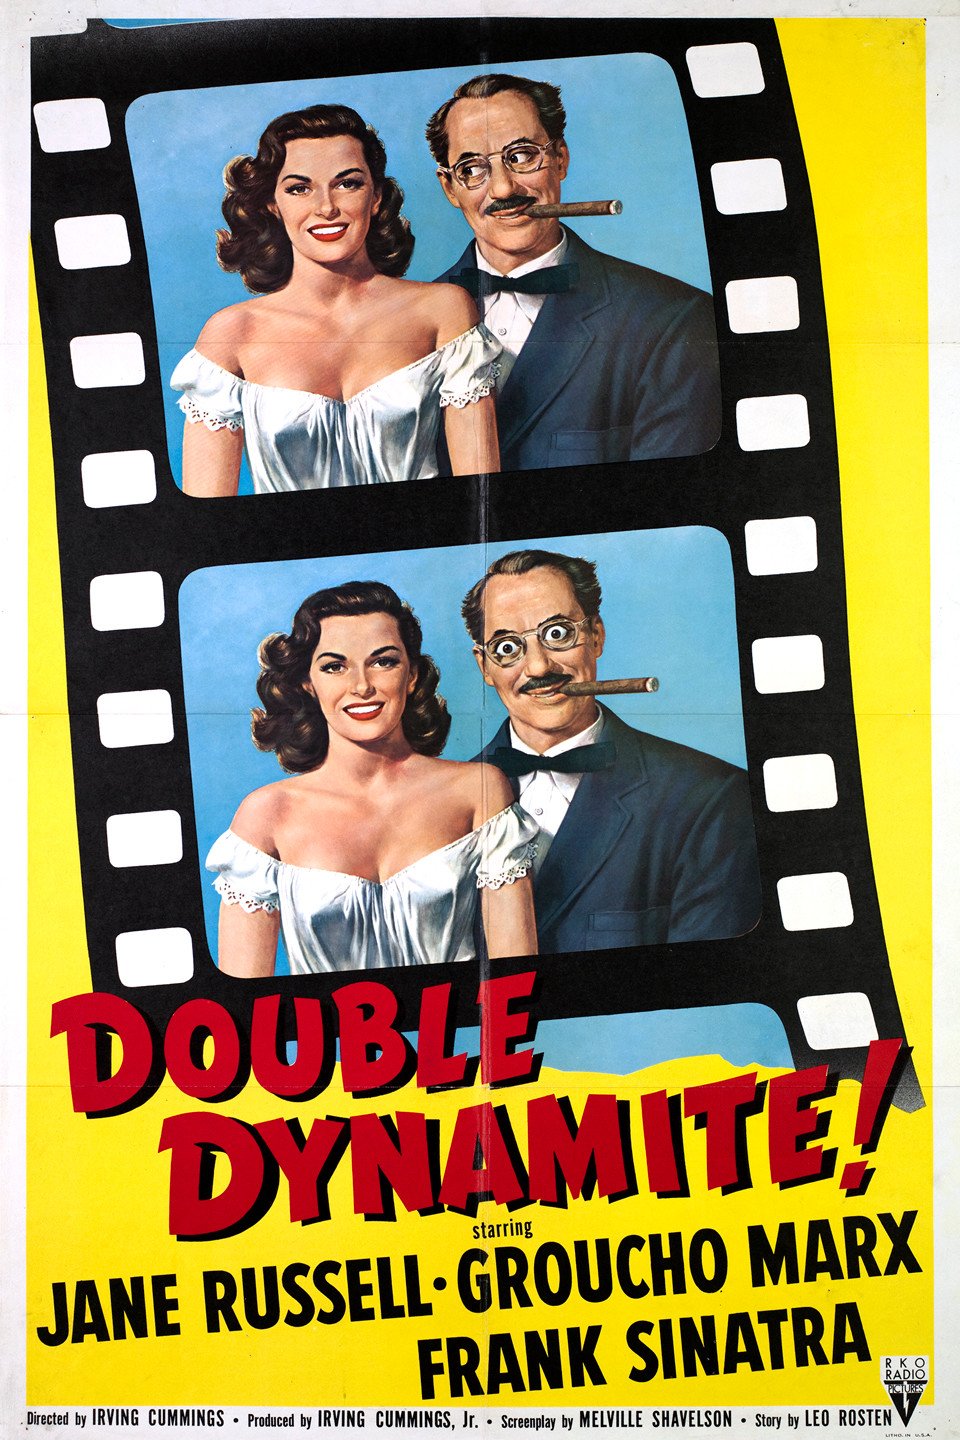 Poster of the movie Double Dynamite